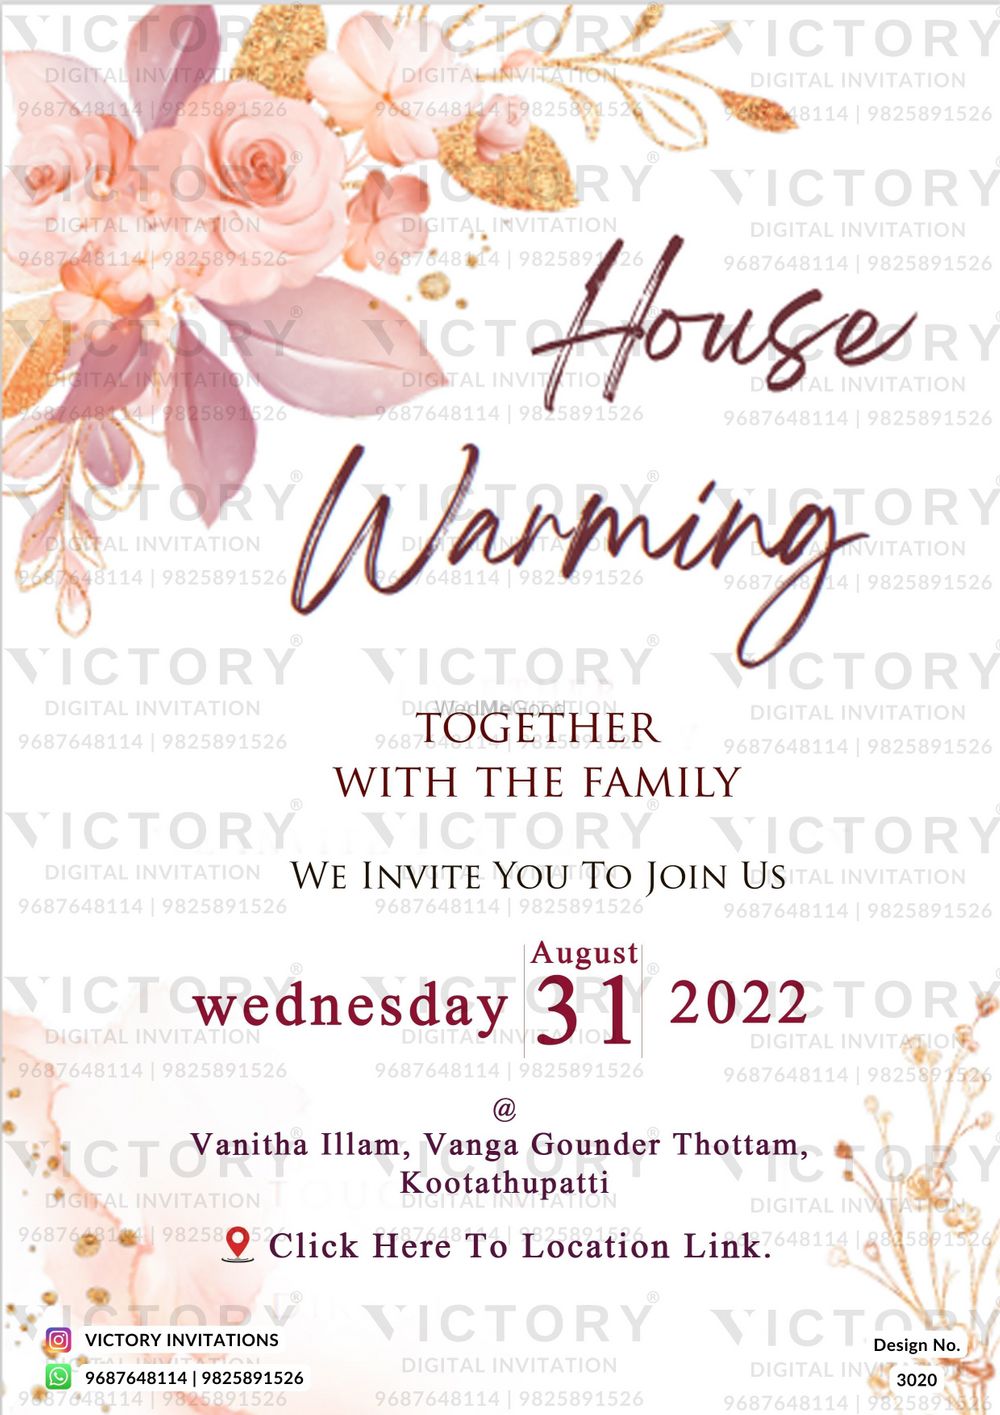 Photo From House Warming - By Victory Invitations